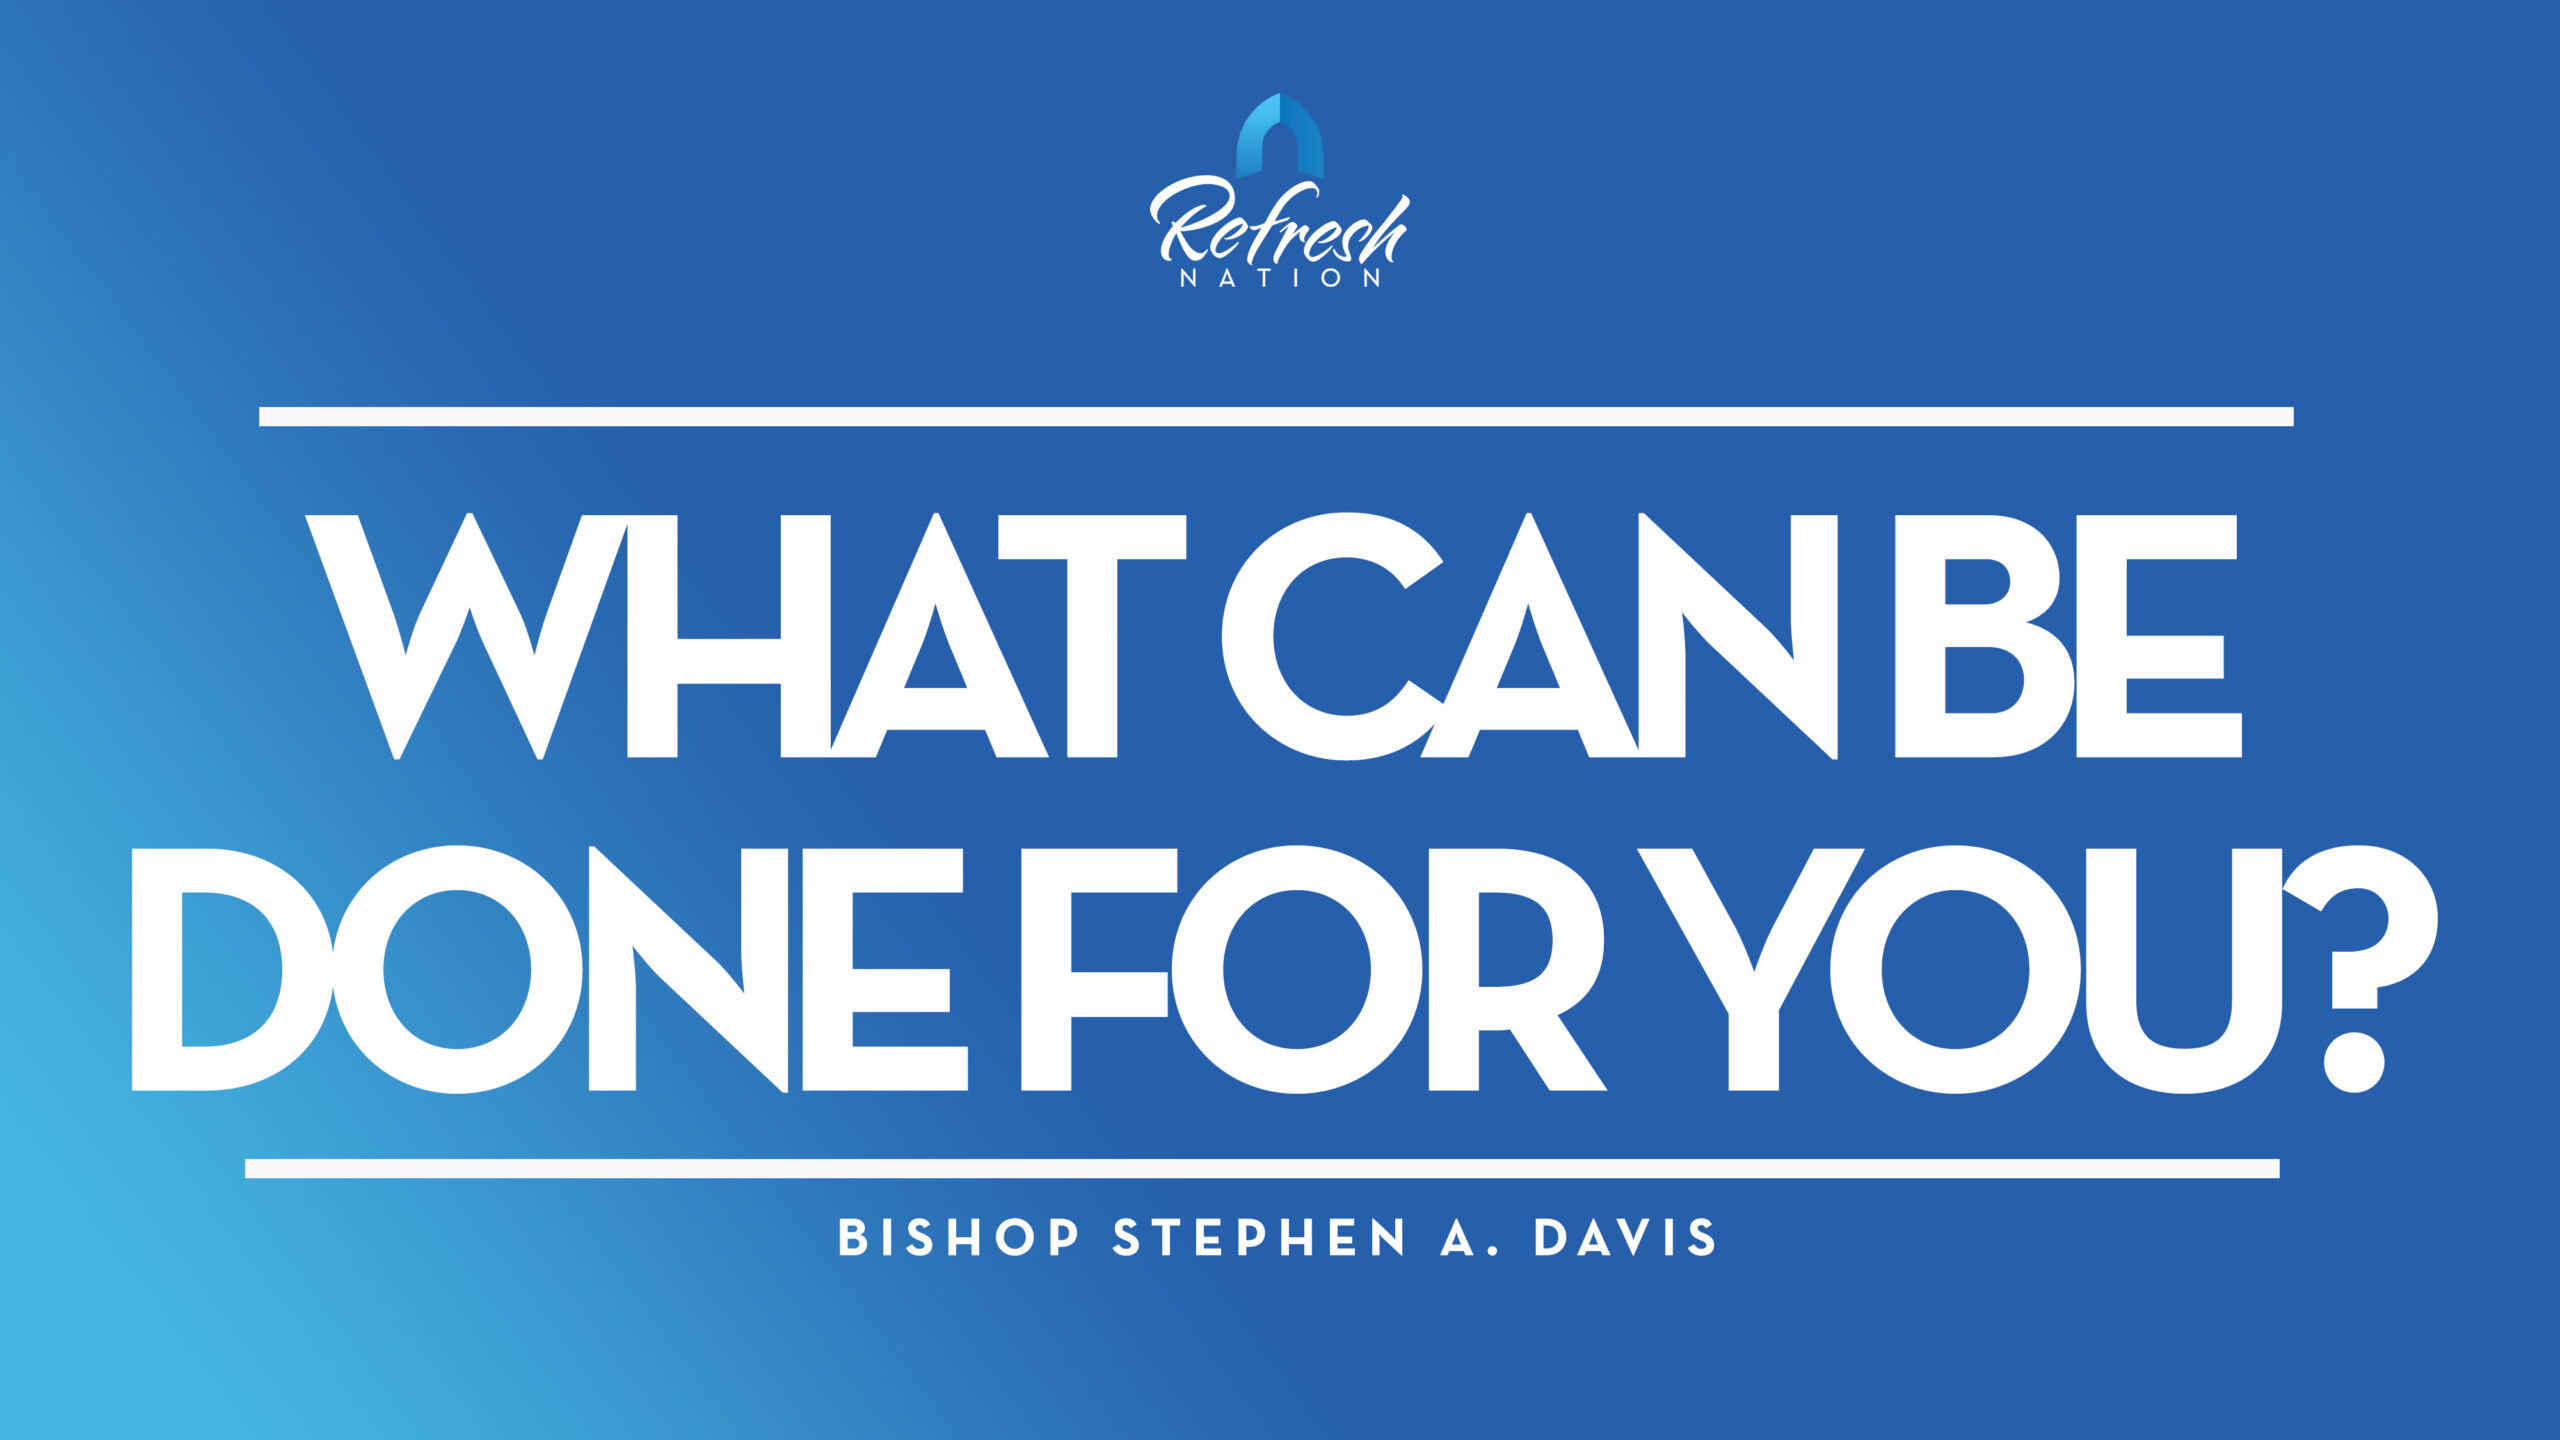 What Can Be Done For You? – Bishop Stephen A. Davis